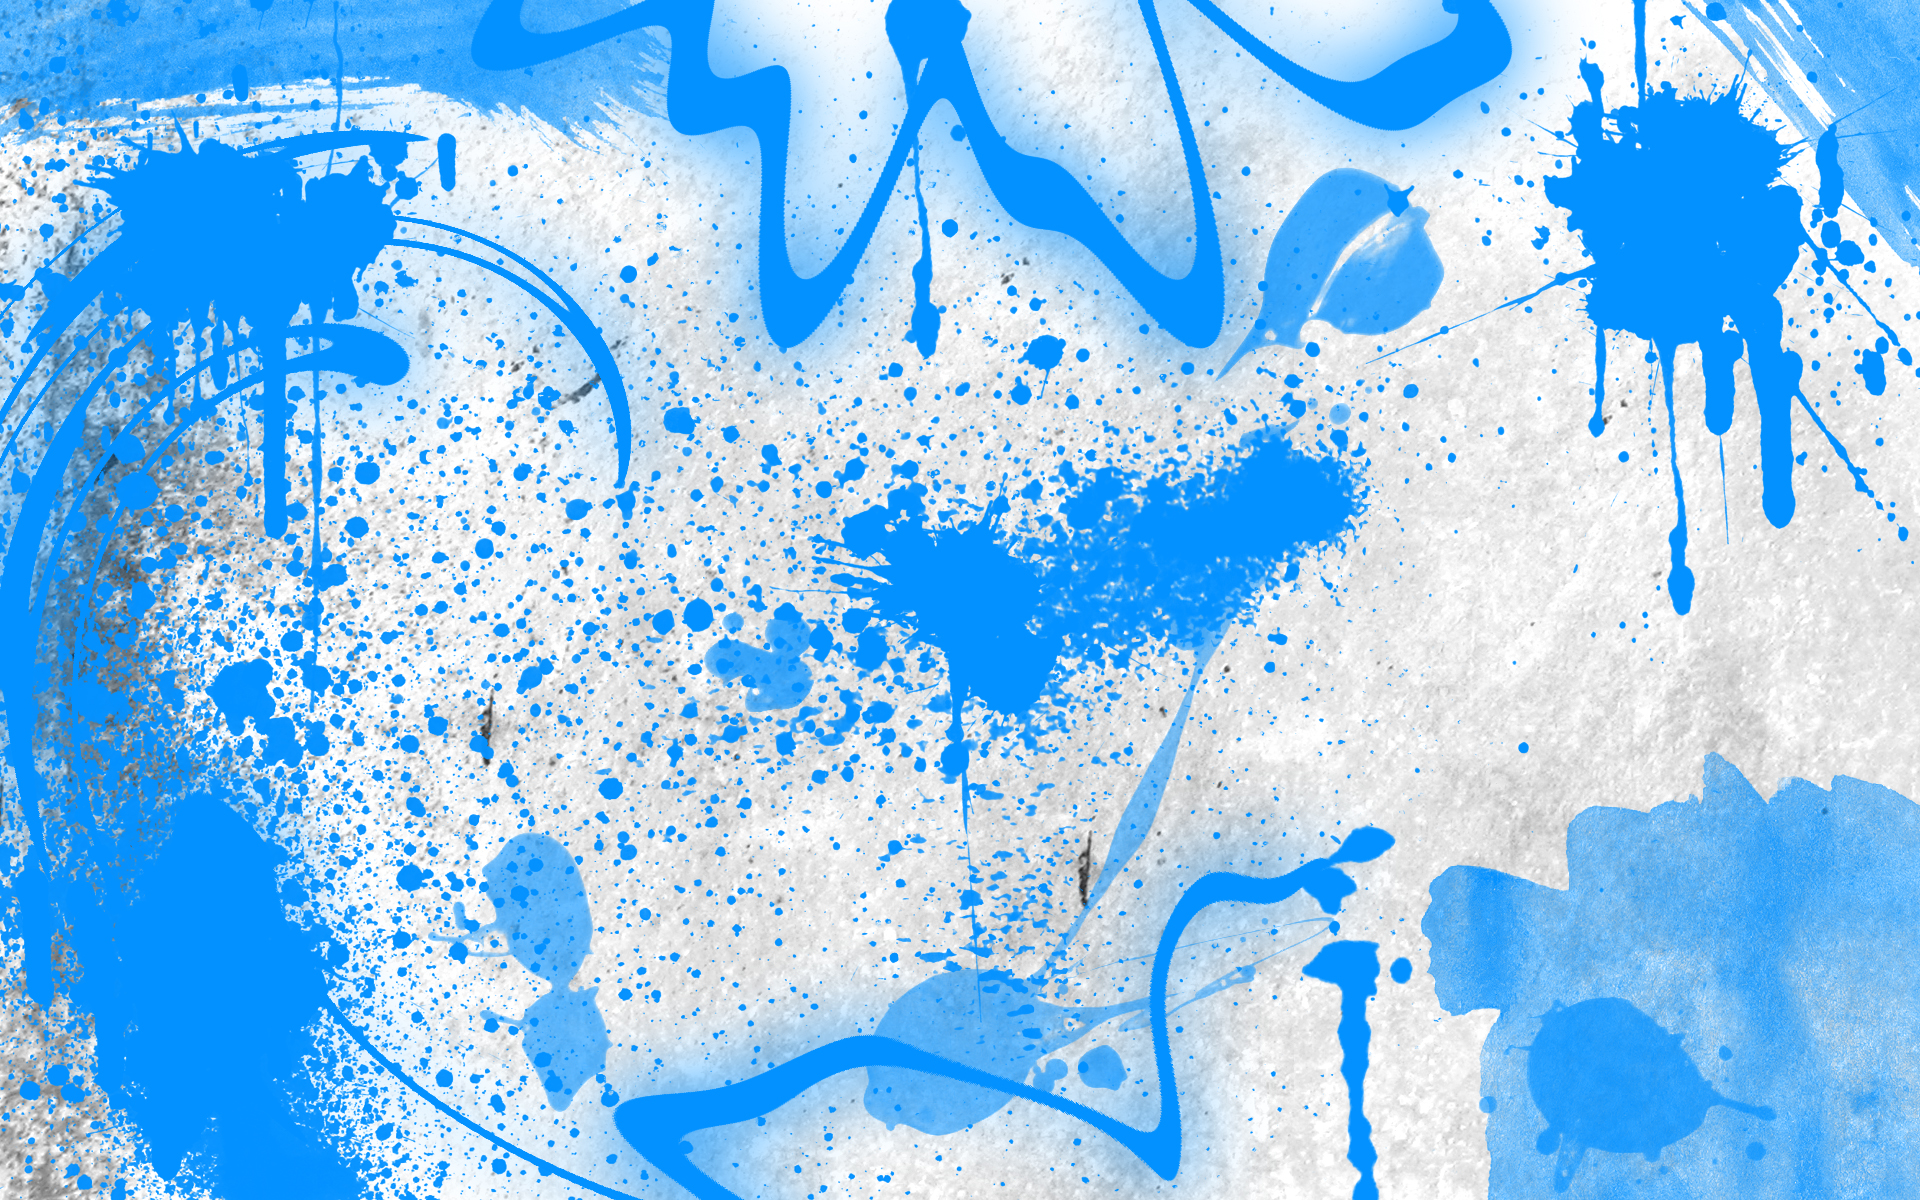 310+ Graffiti HD Wallpapers and Backgrounds